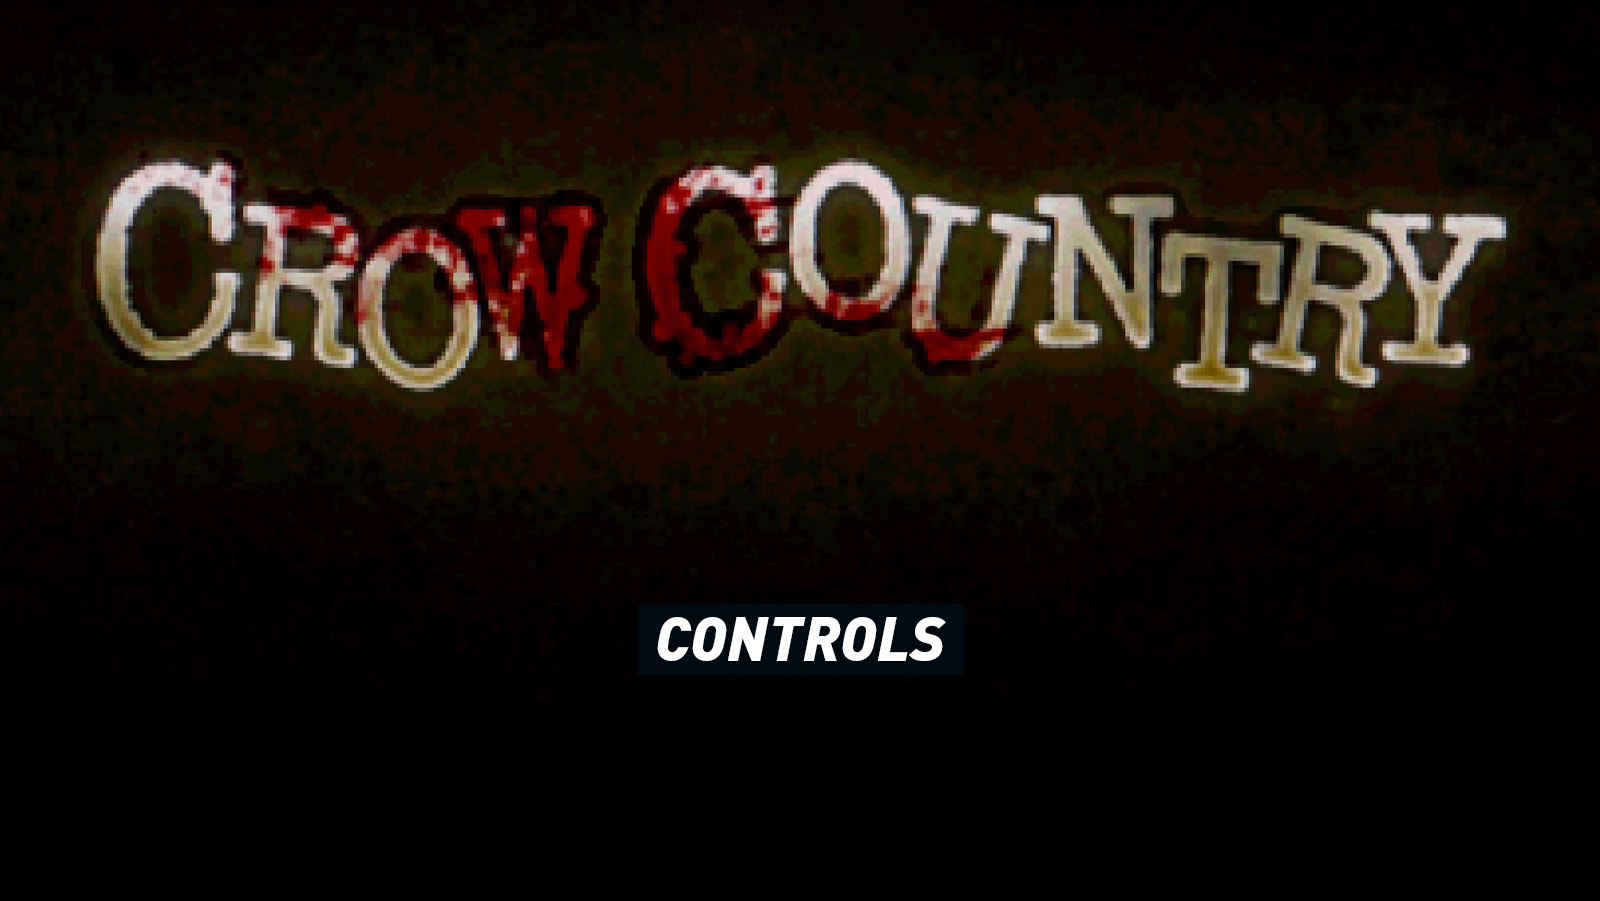 Crow Country – Controls